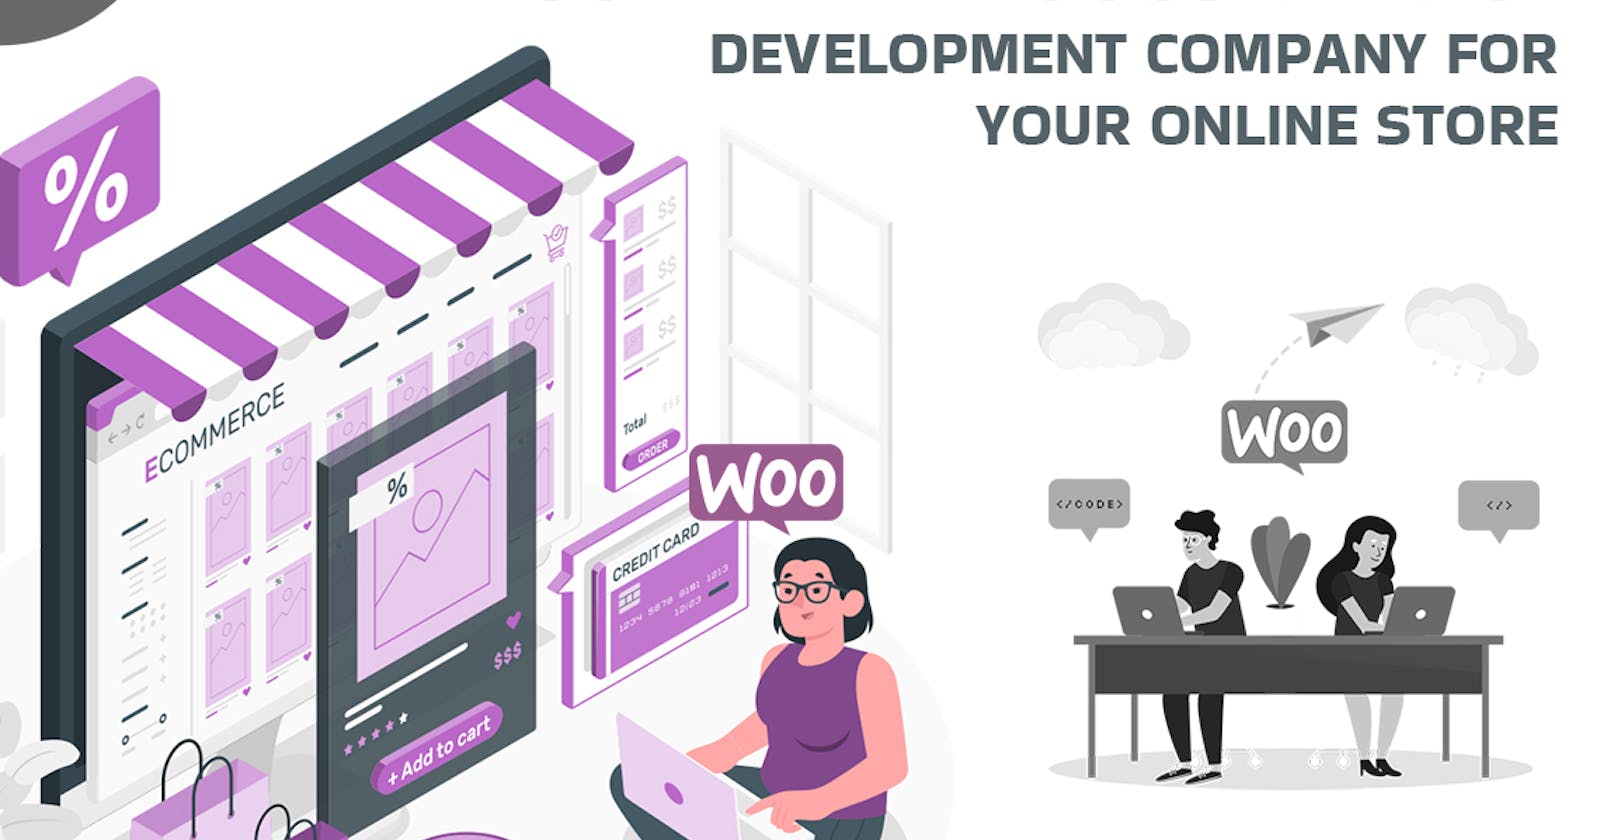 Why You Need a WooCommerce Development Company for Your Online Store